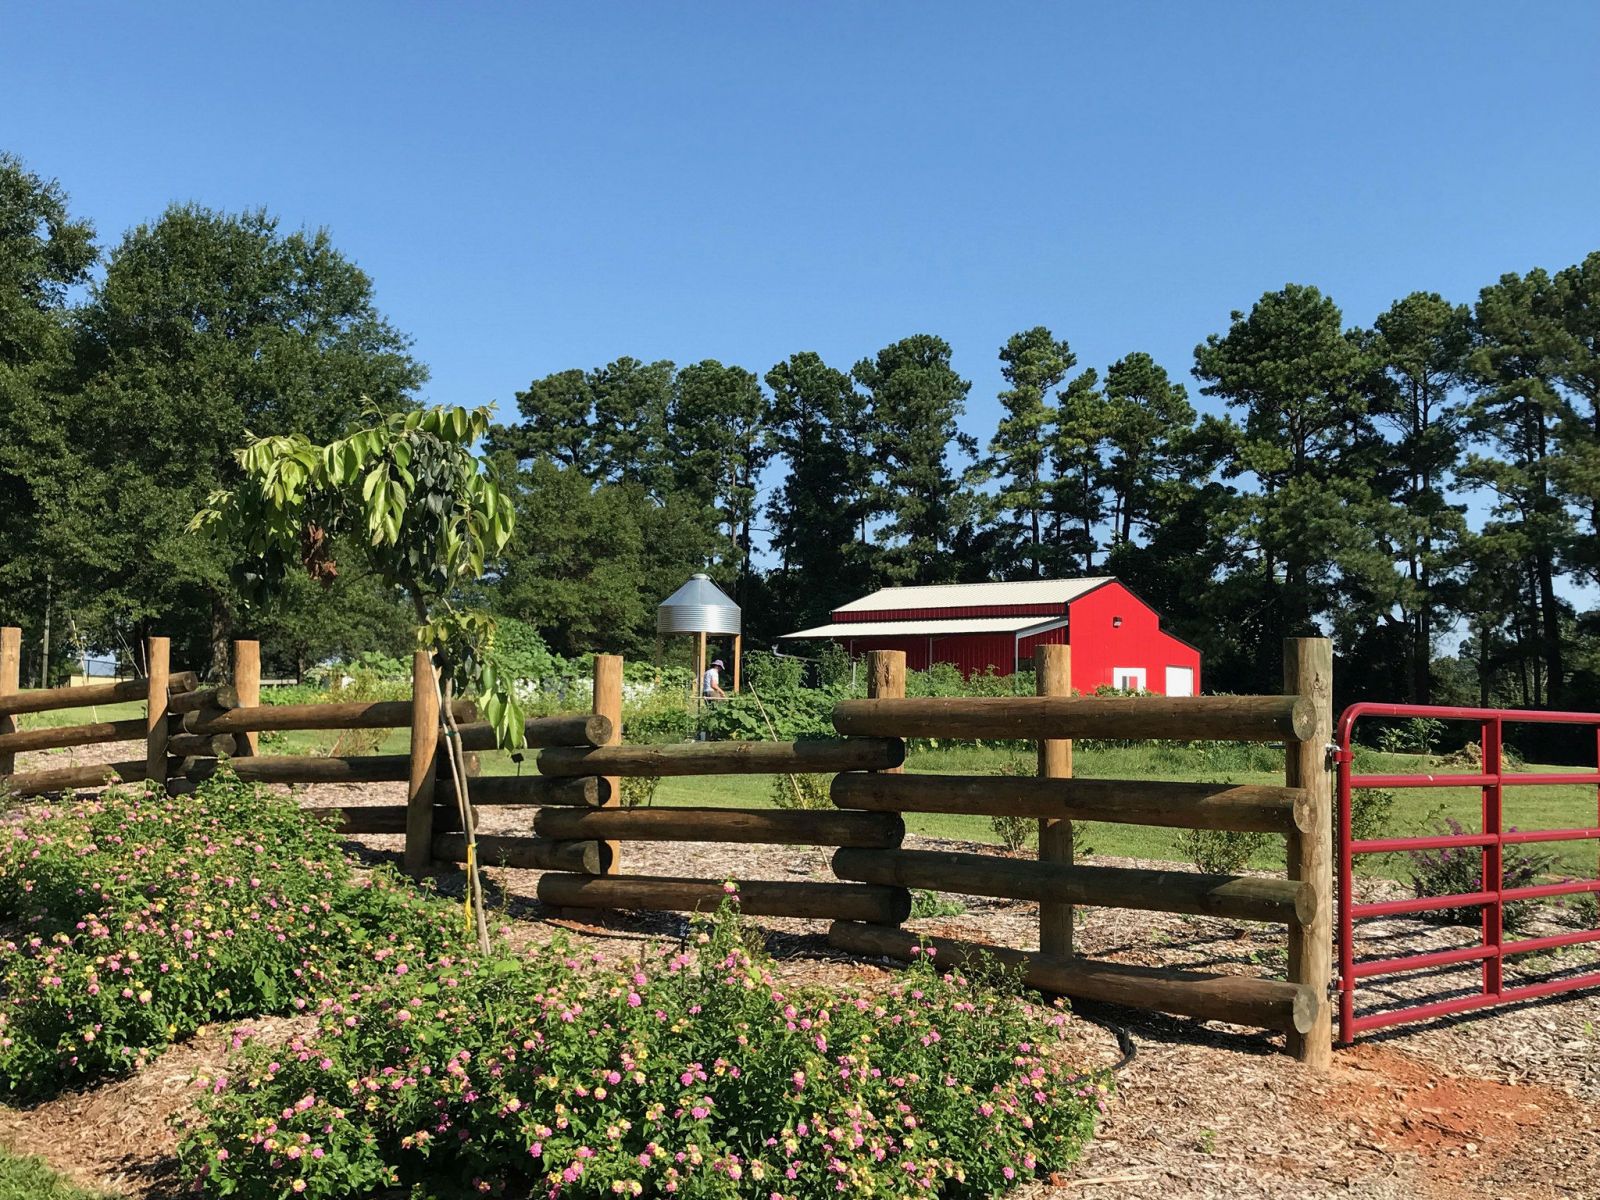 The Center for Sustainable Agriculture has opened at Spartanburg Community College. (Photo/Provided)